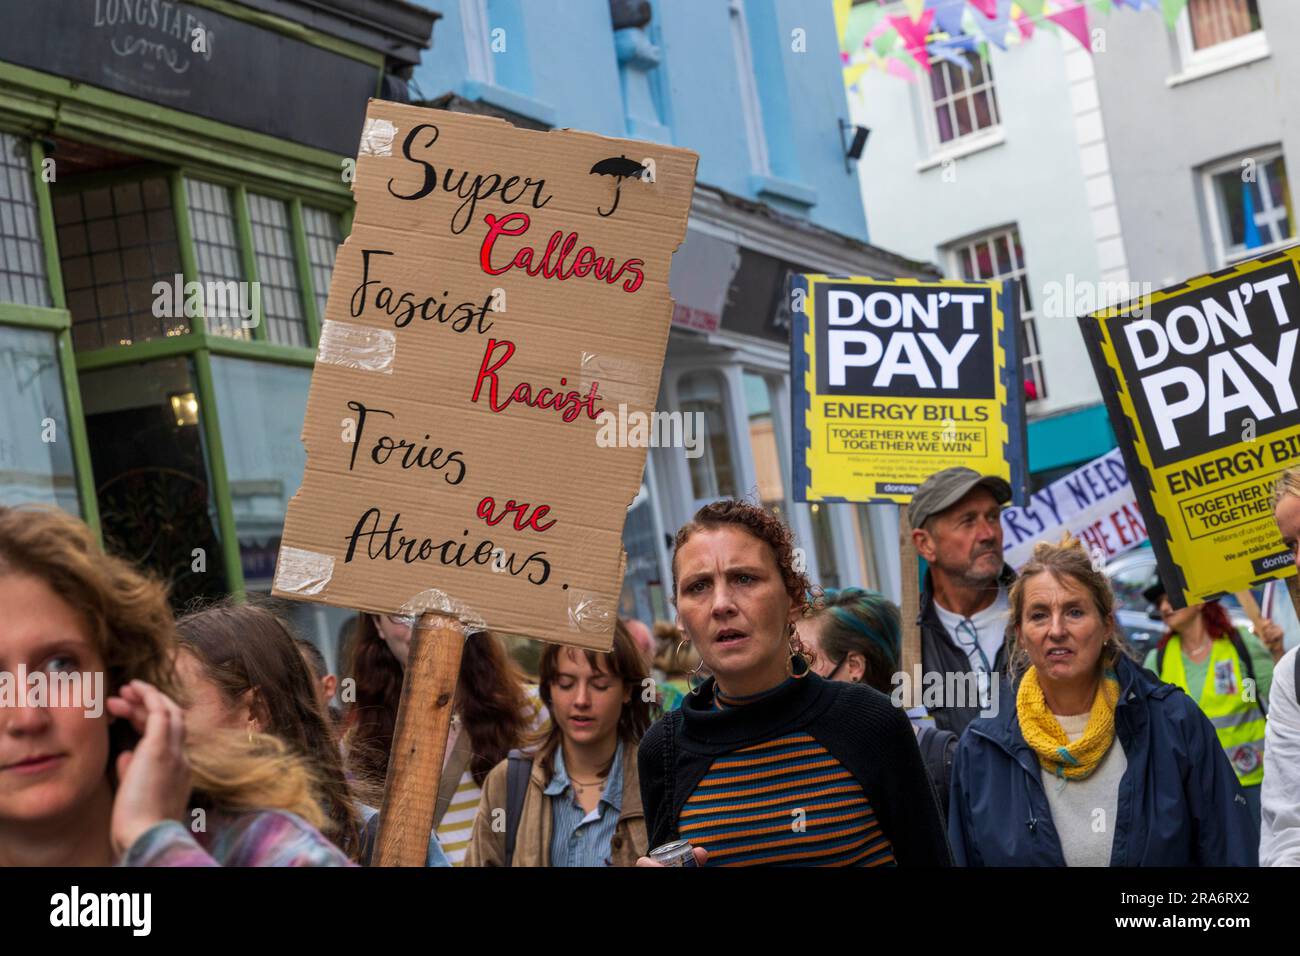 Enough is Enough - Cost of living protest occurs in Falmouth as fuel costs rise further. Stock Photo